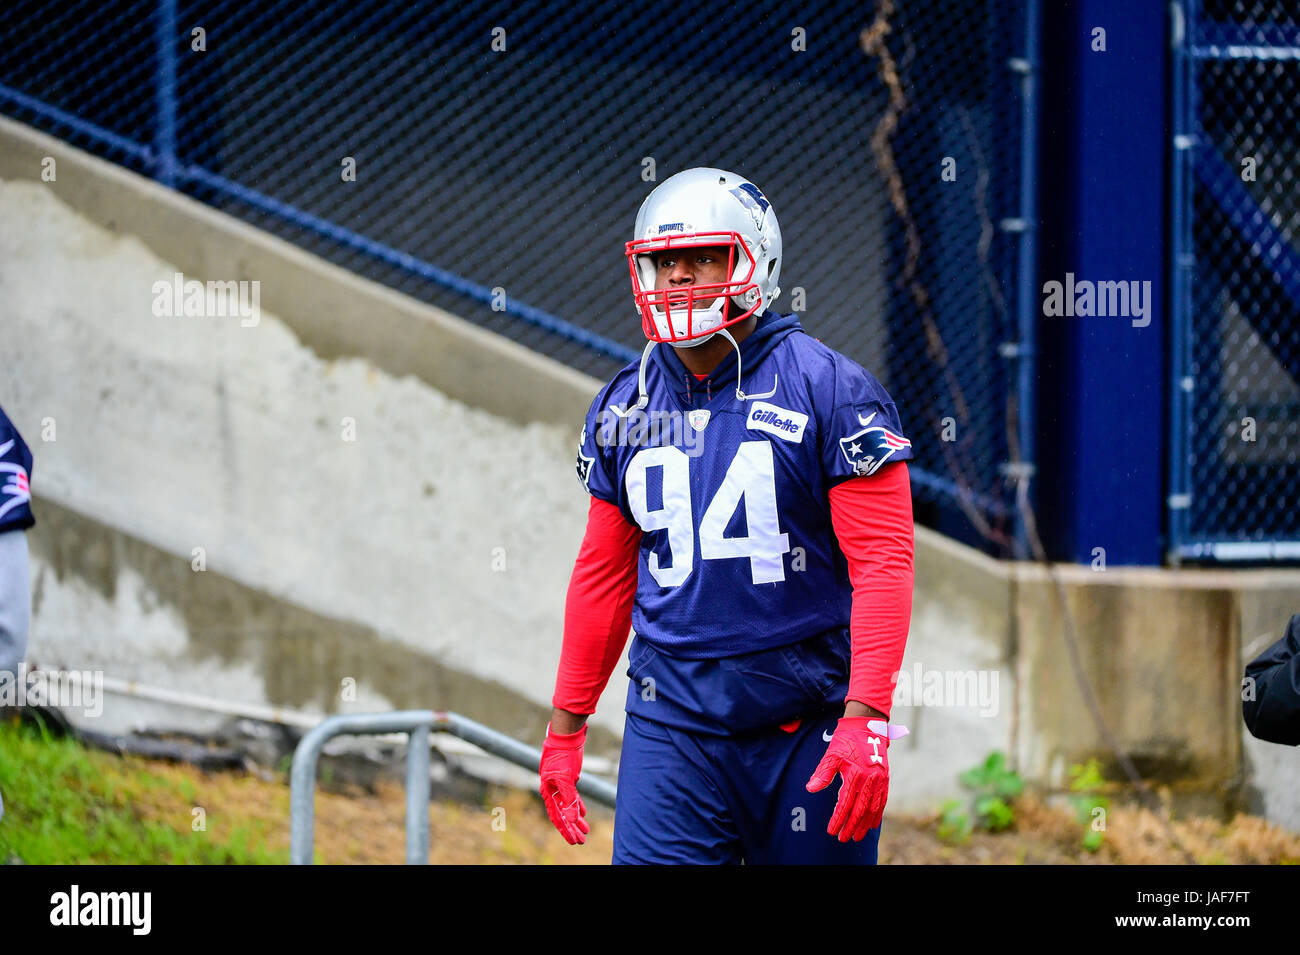 Foxborough, Massachusetts, USA. 6th June, 2017. New England Patriots defensive end Kony Ealy (94) walks to practice in the rain at the New England Patriots mini camp held on the practice field at Gillette Stadium, in Foxborough, Massachusetts. Eric Canha/CSM/Alamy Live News Stock Photo